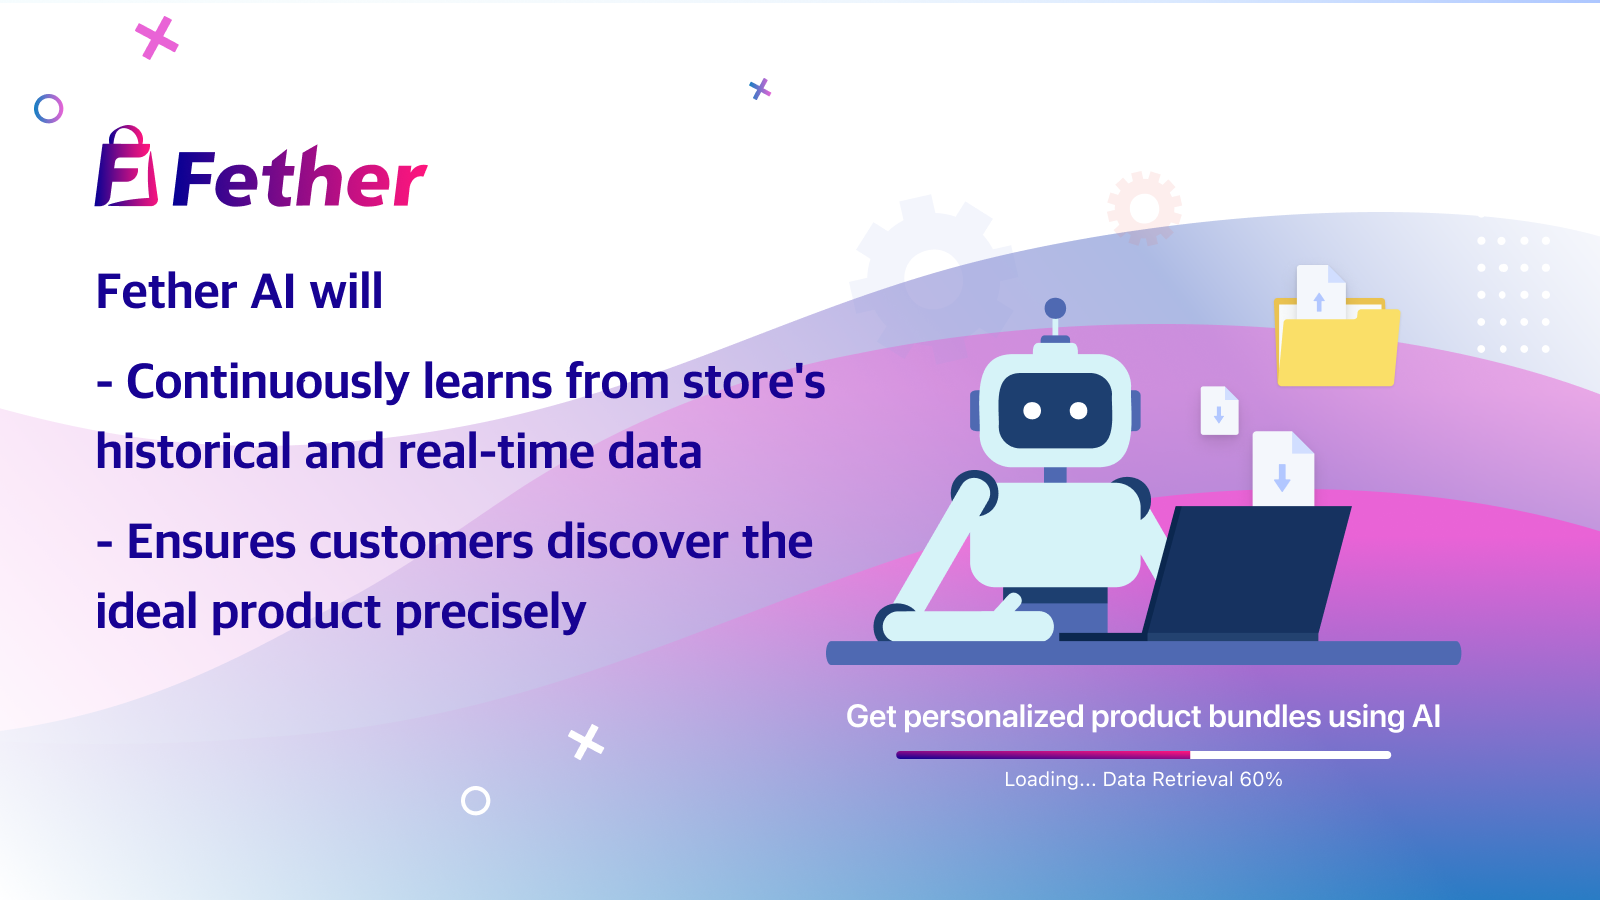 Continuously learns from store's historical and real time data